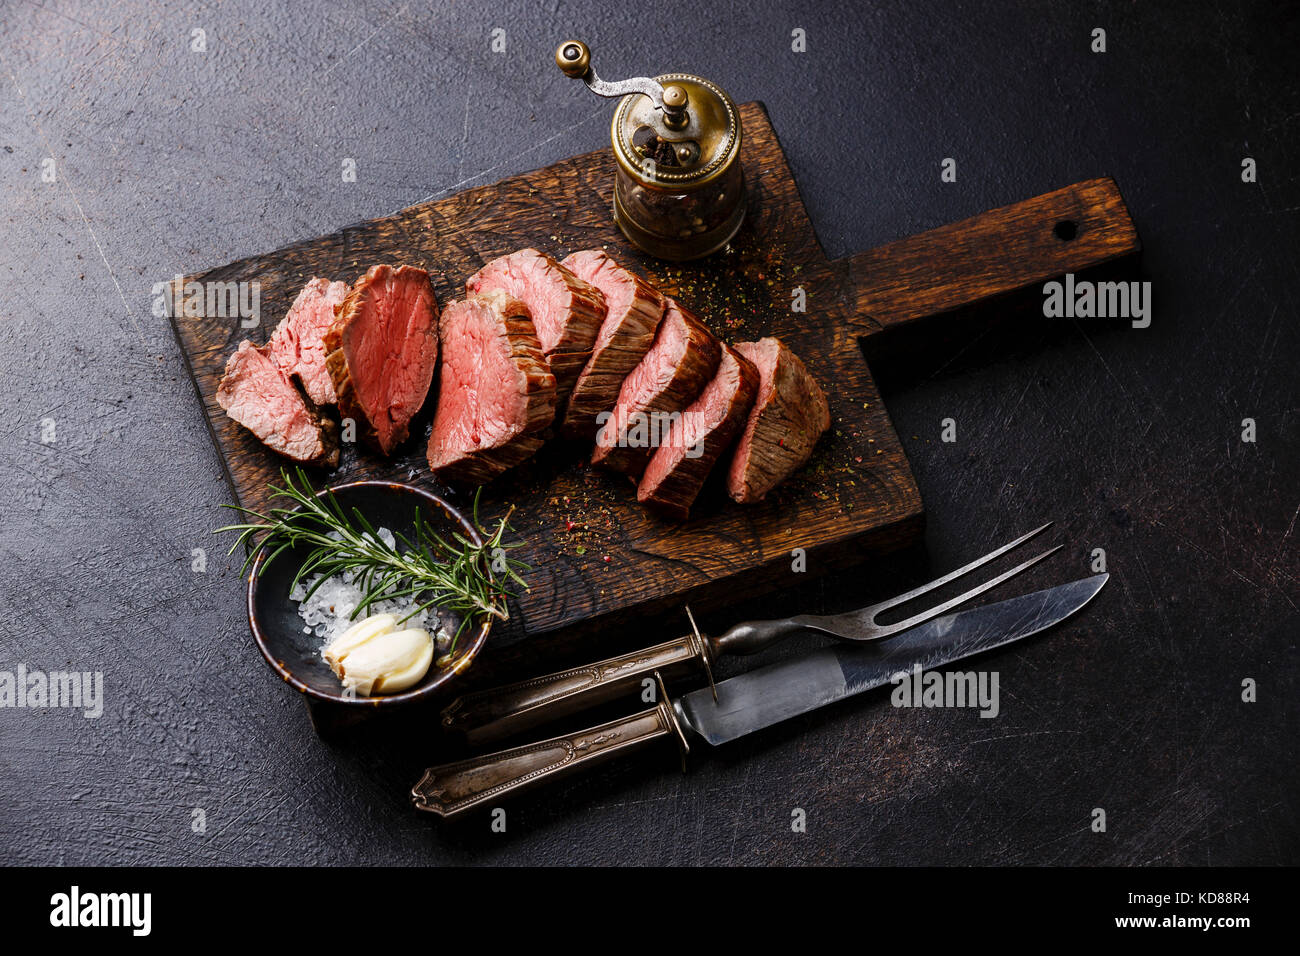 Sliced tenderloin Steak Roast beef with knife and fork carving set on wooden cutting board on dark background Stock Photo